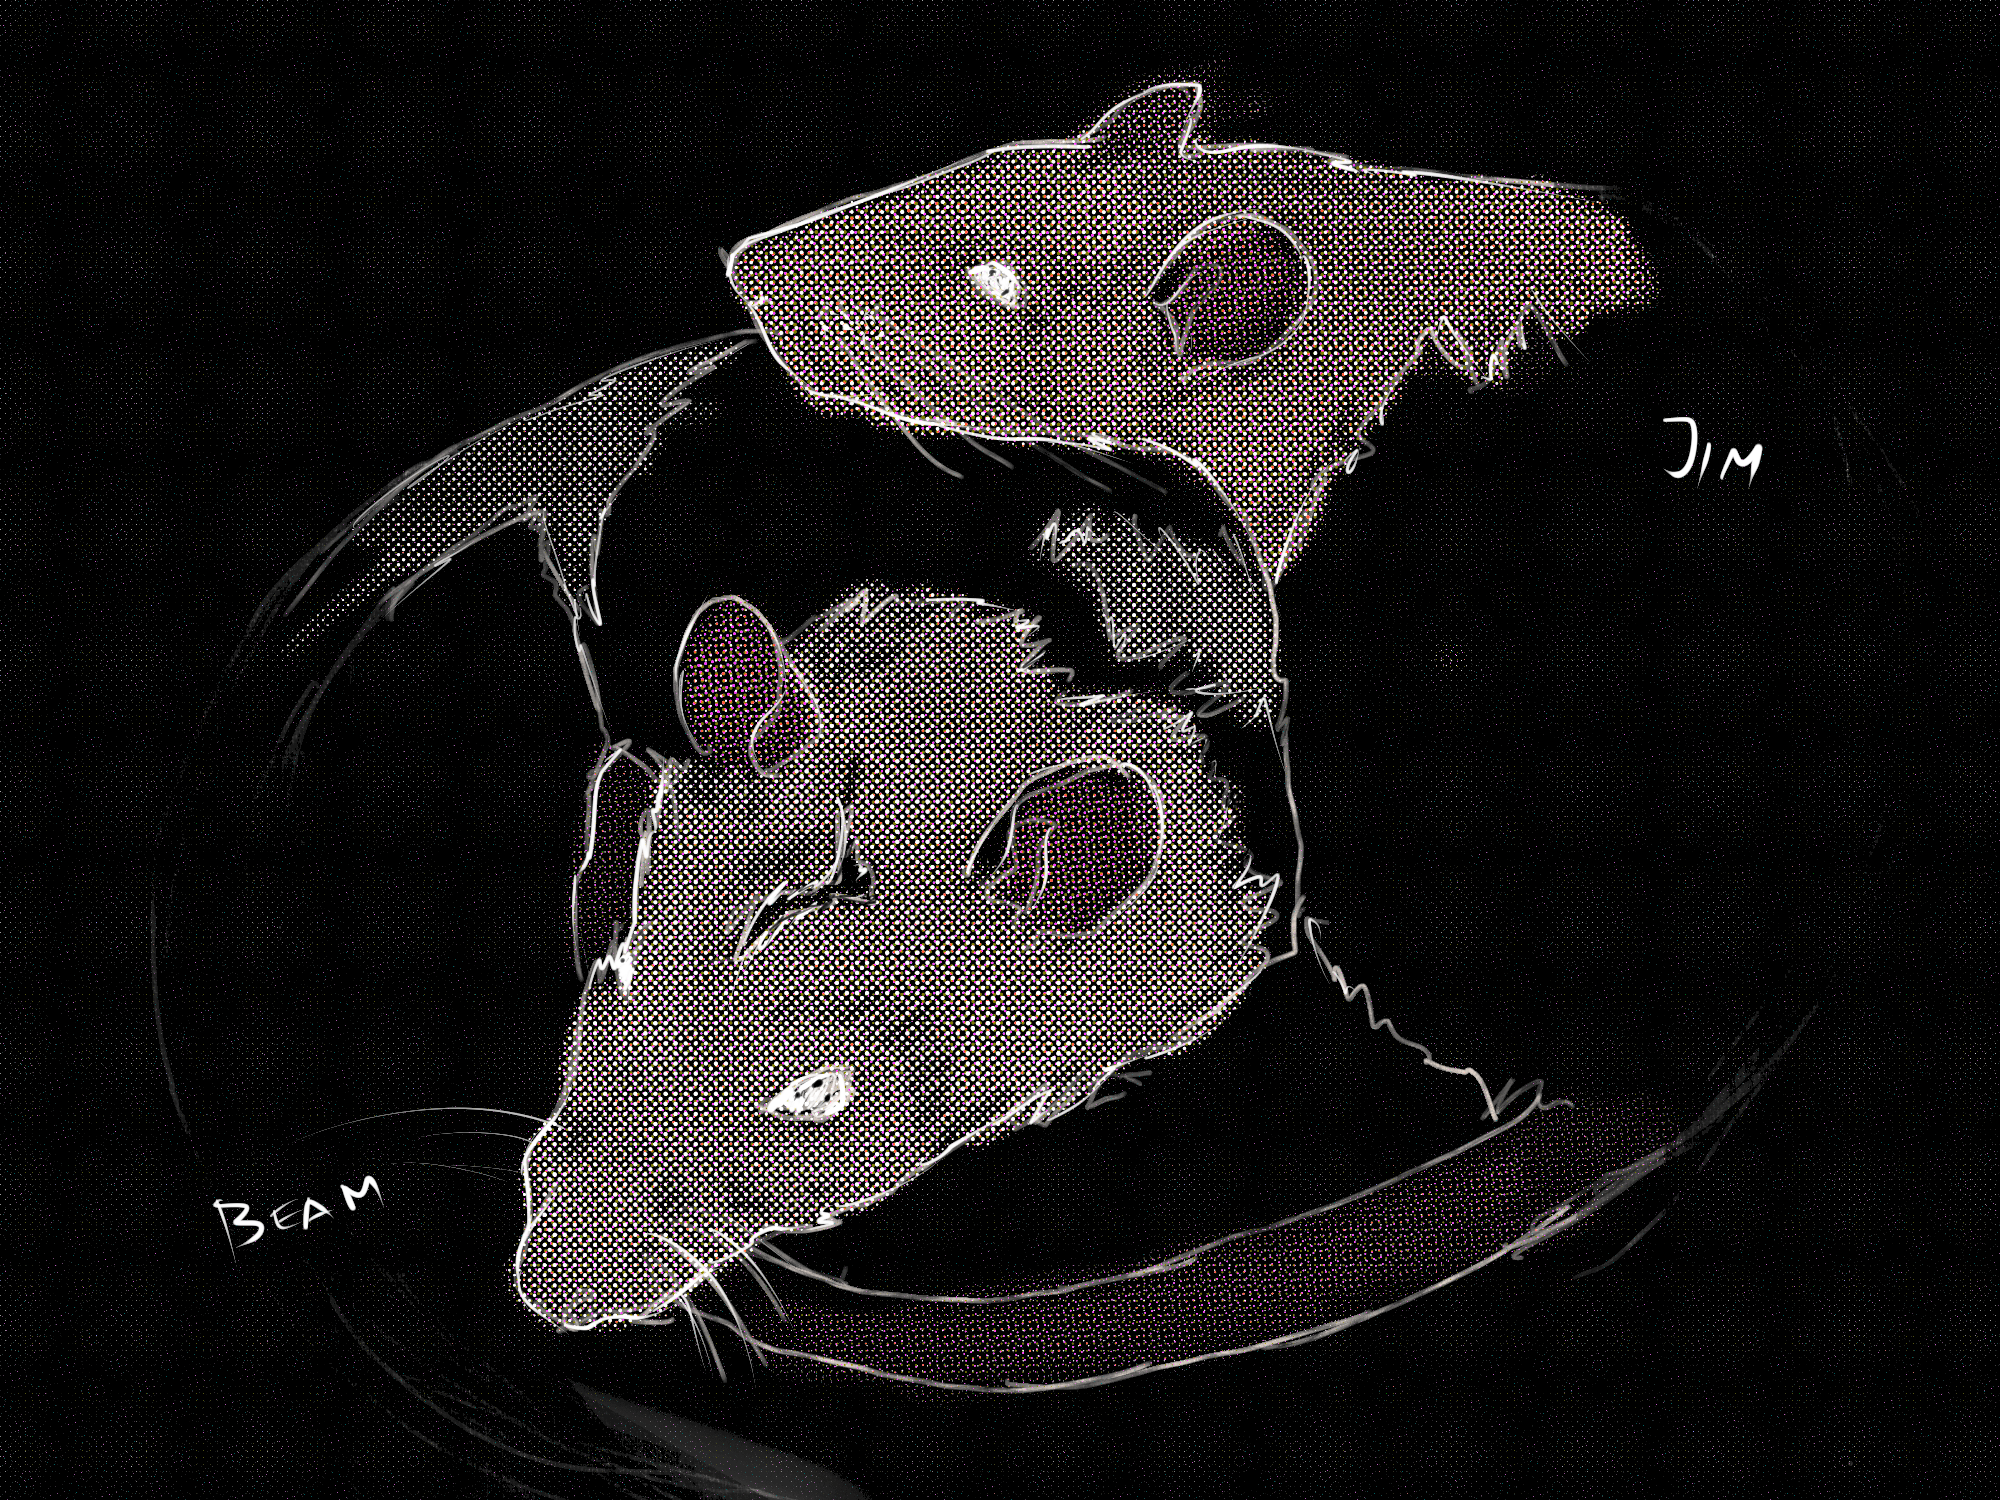 Drawing by Viktoriia Shcherbak of our two rats, Jim and Beam.